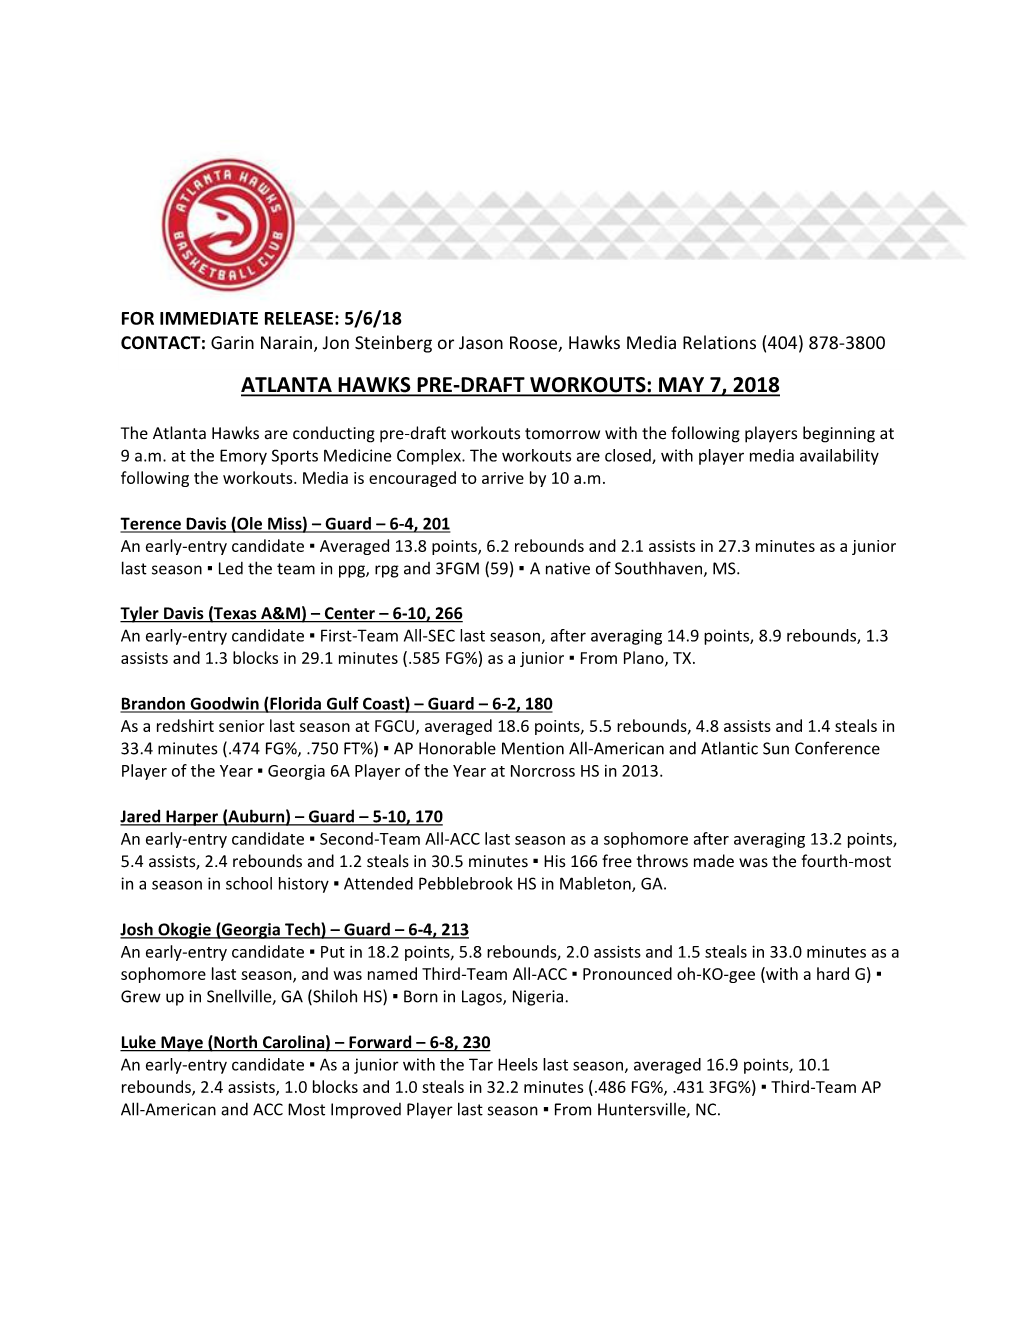 Pre-Draft Workouts: May 7, 2018